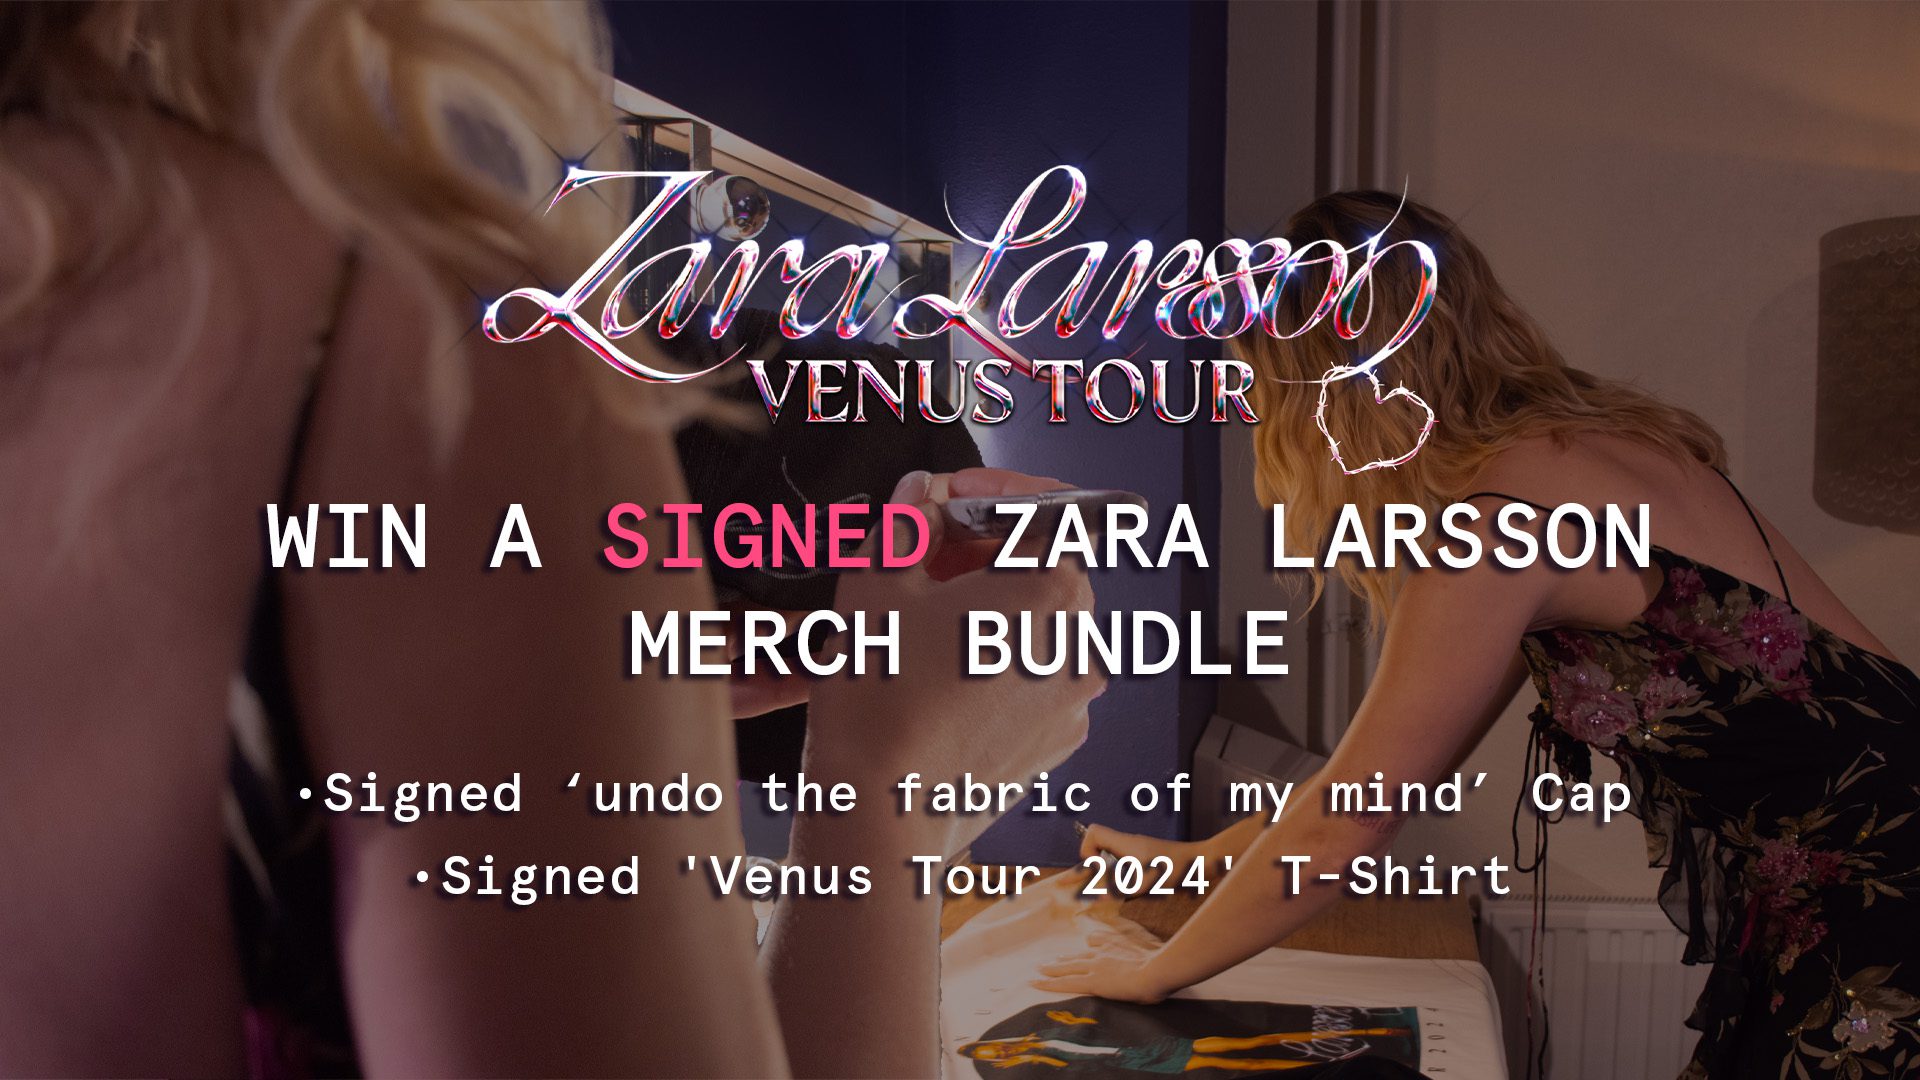 Promotional image for Zara Larsson's Venus Tour, featuring a contest to win signed merchandise including a cap and t-shirt.